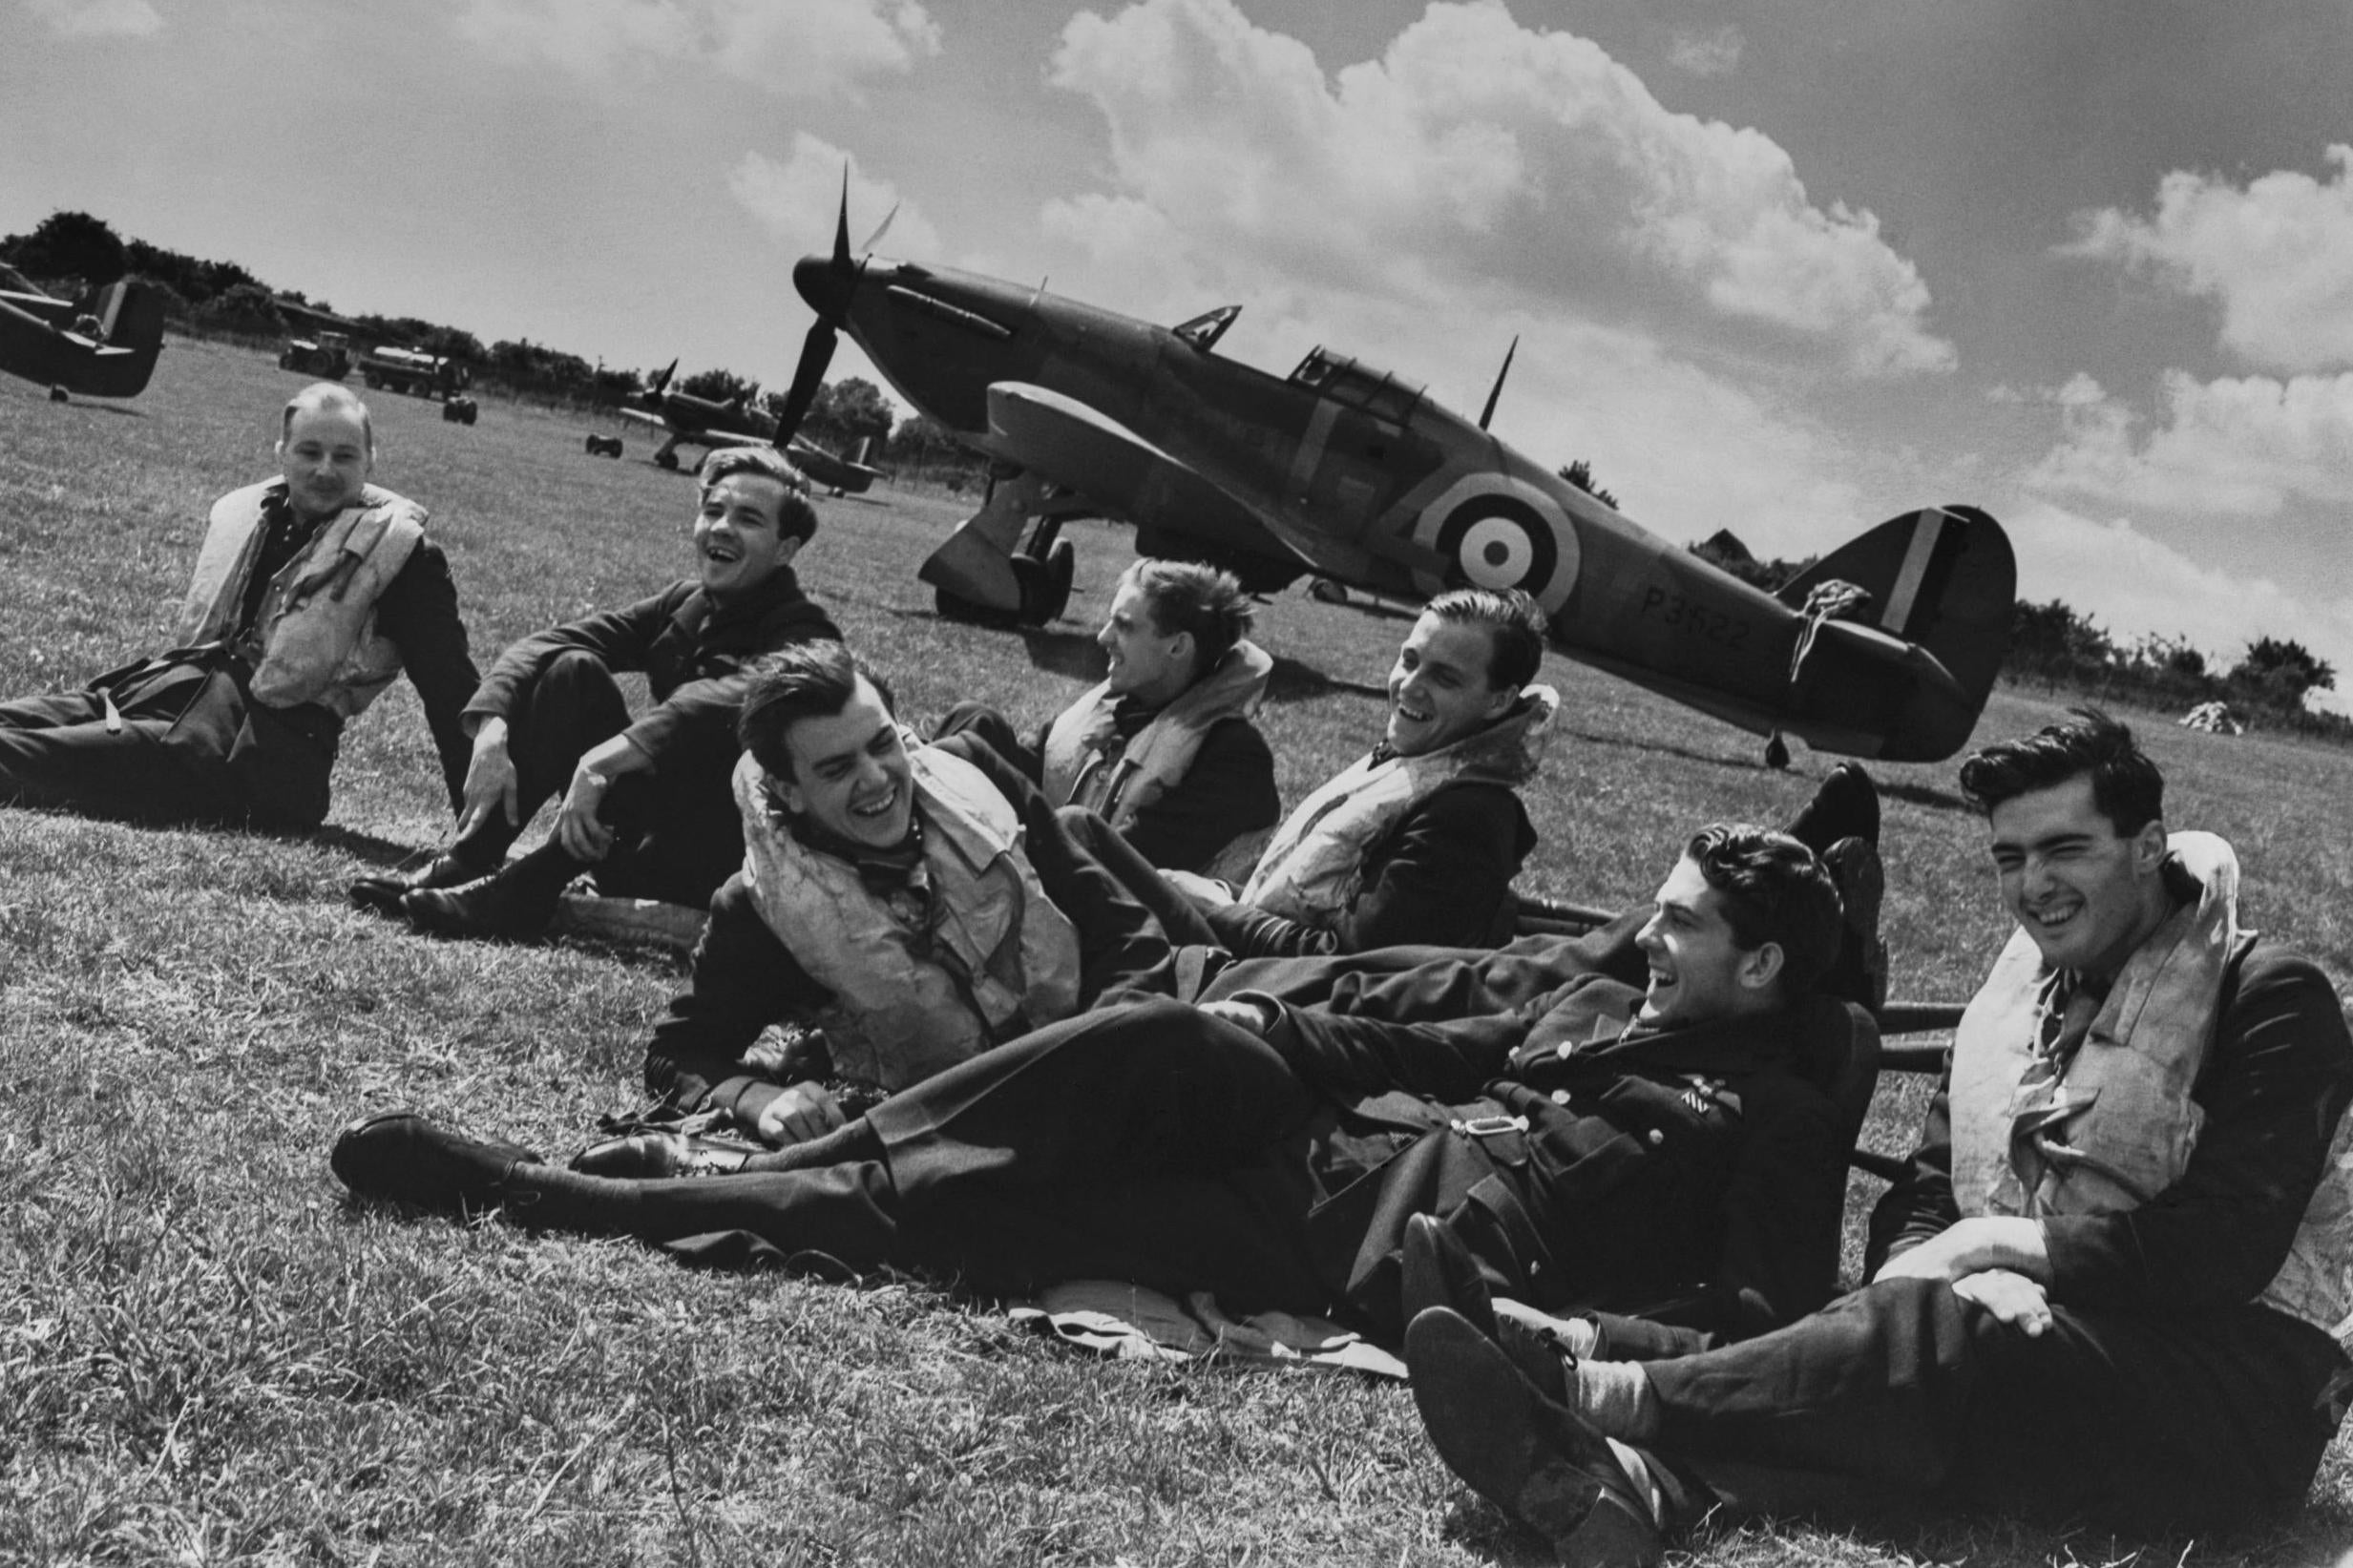 Pilots relax on the grass beside their Hawker Hurricane Mk1 fighters during the Battle of Britain at RAF Hawkinge near Folkestone